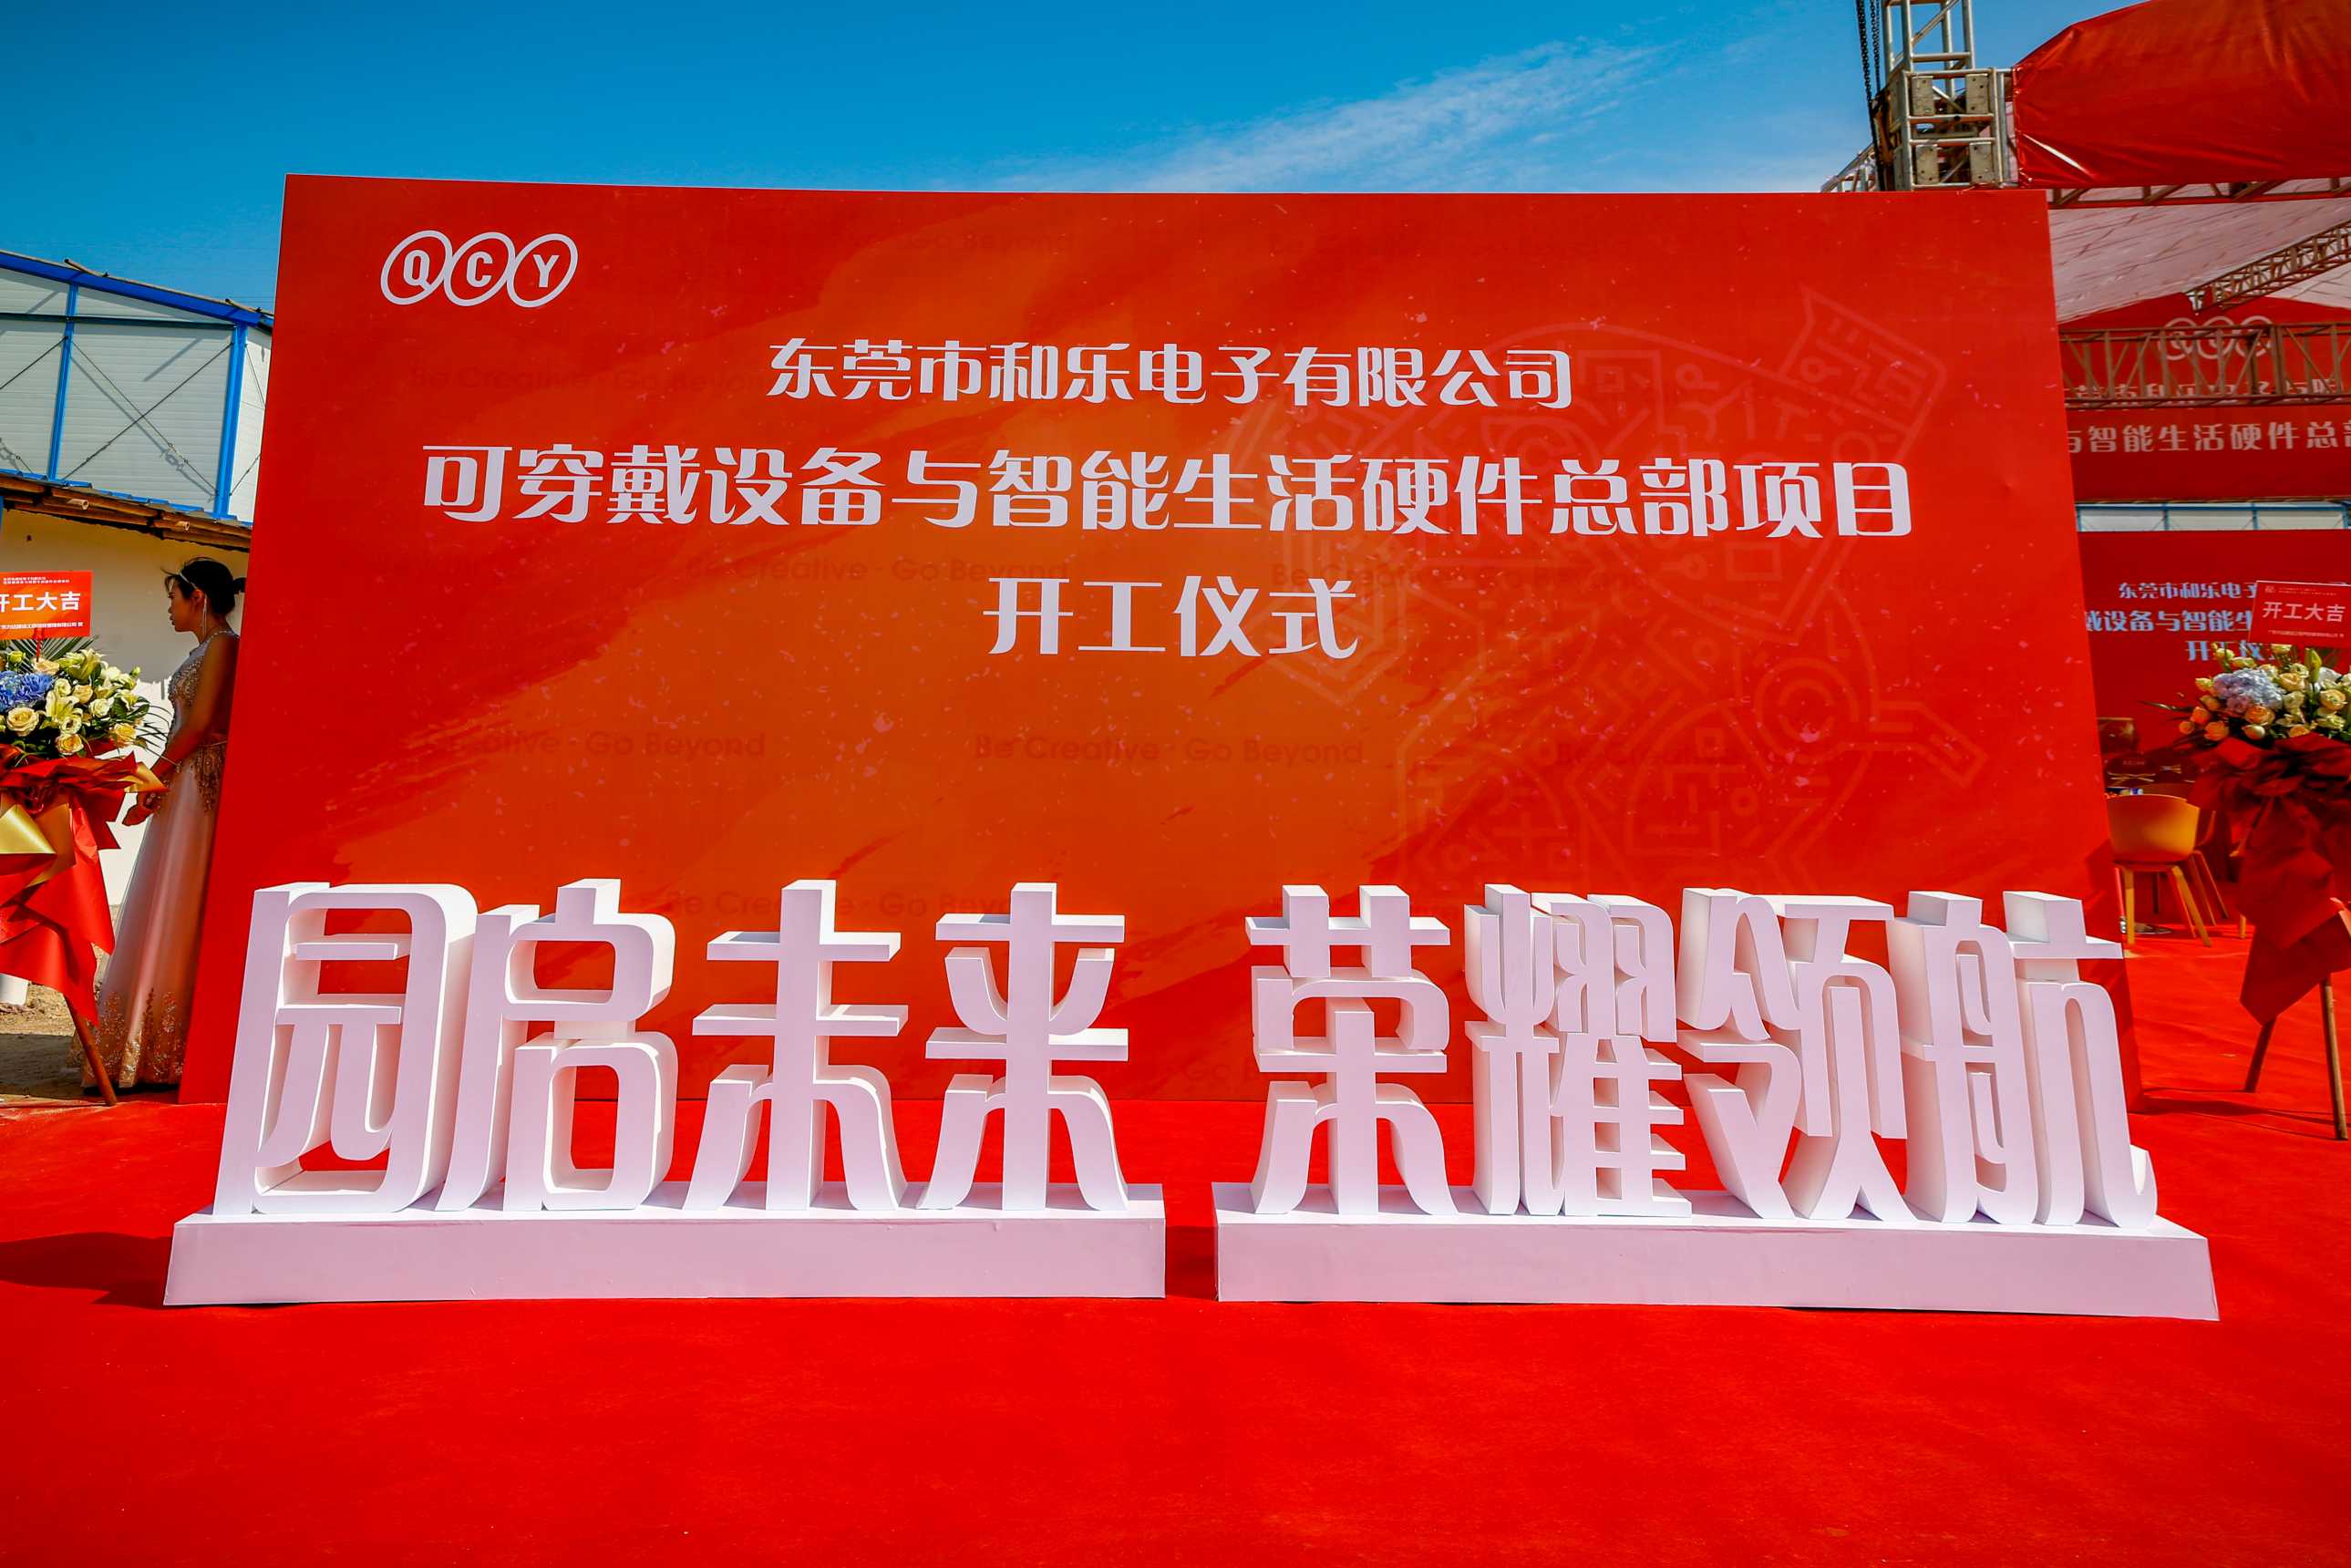 New Project Leading Honor Future—— A Ceremony of Kicking Off Construction of Hele Electronic Zone Wrapped Up Successfully